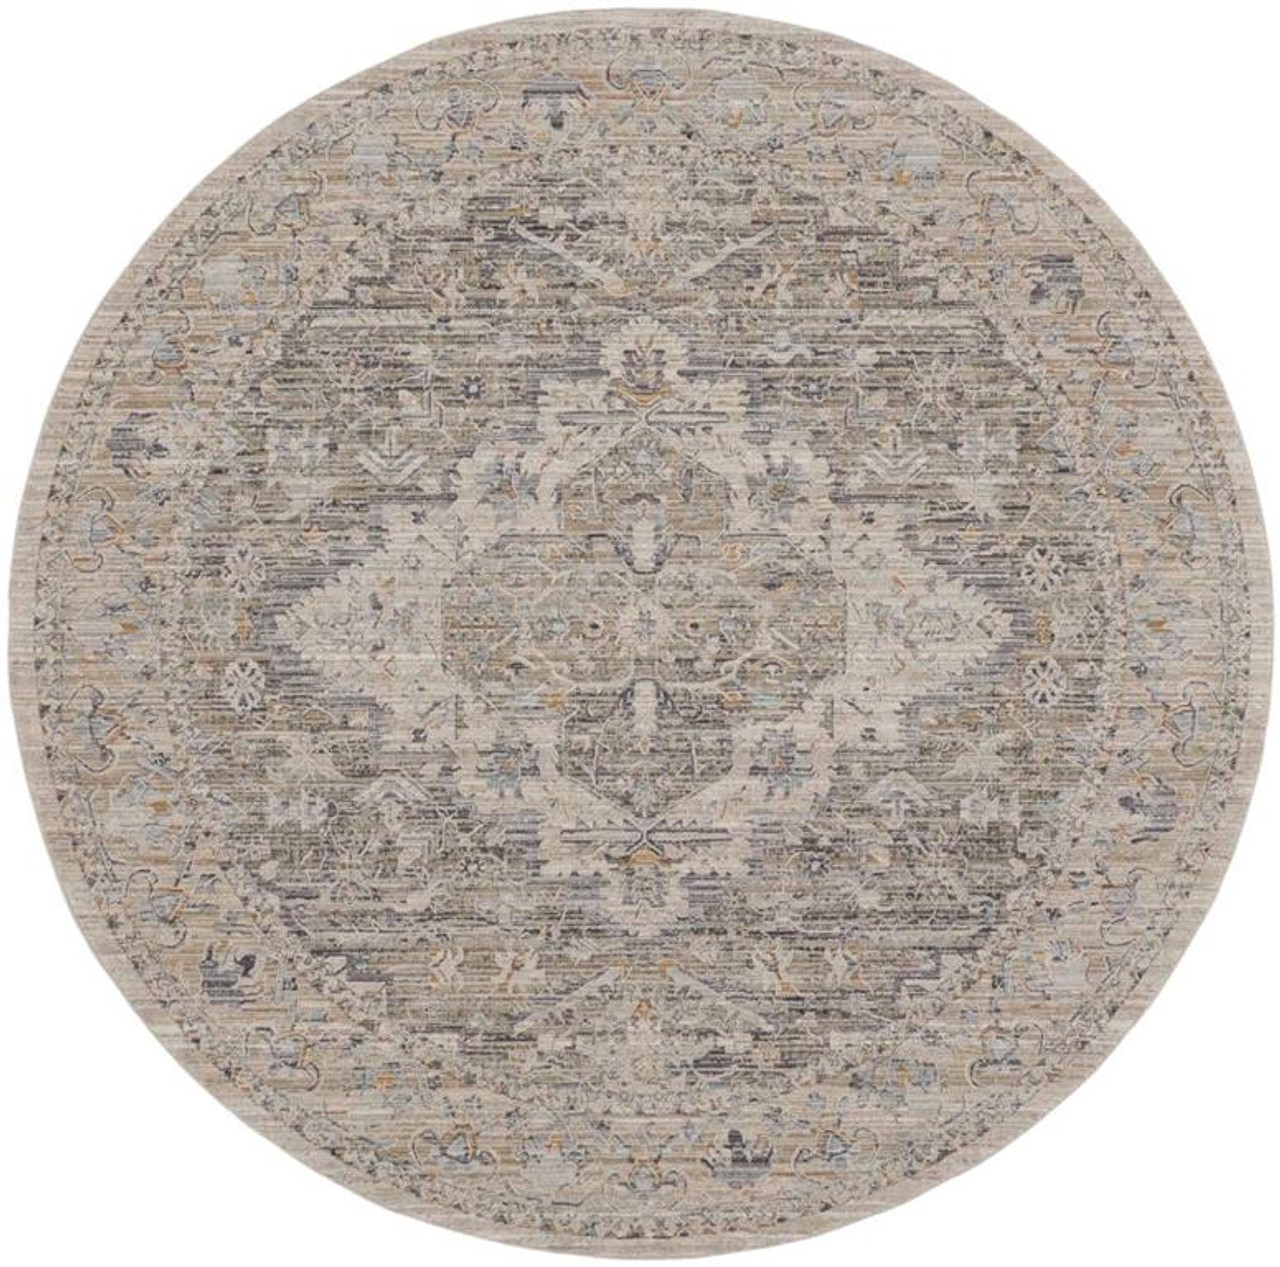 Rowan Braided Texture Ivory 7 ft. 6 in. x 9 ft. 6 in. Indoor/Outdoor Oval  Rug